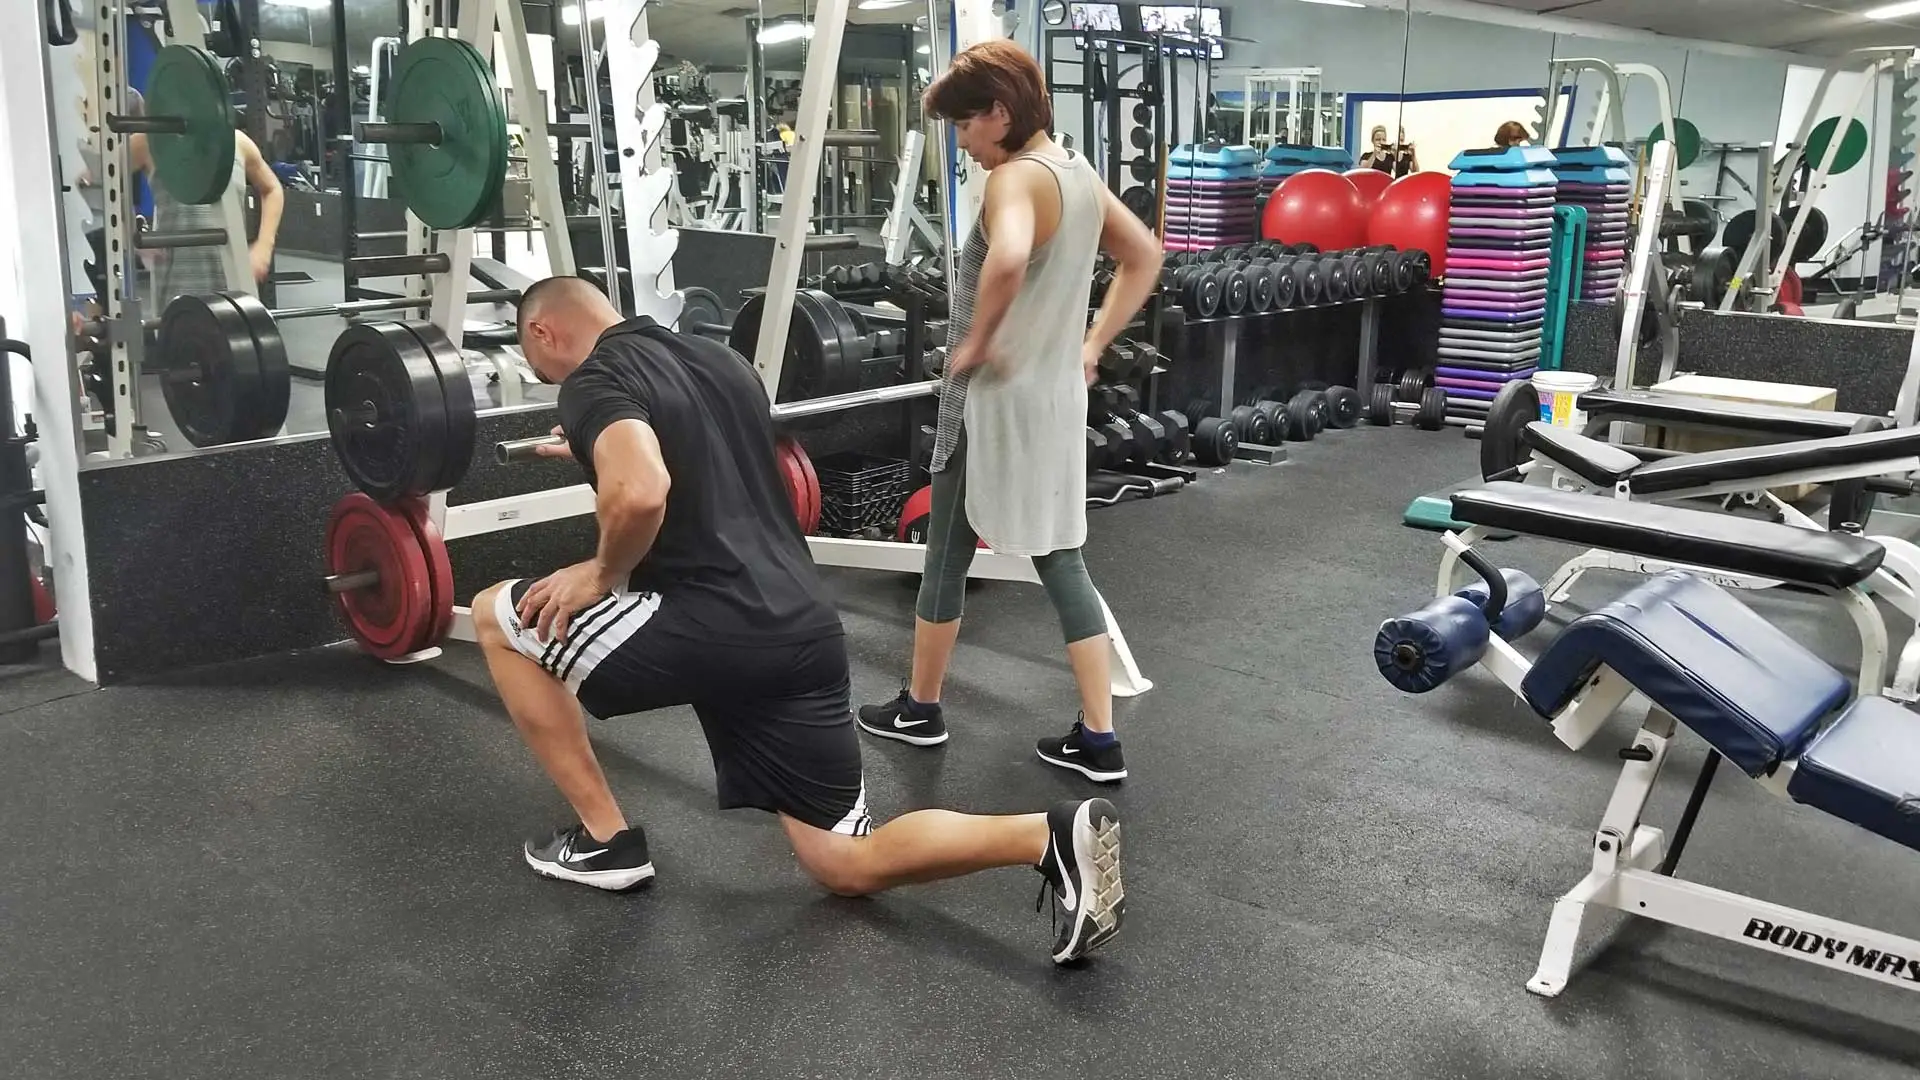 Personal trainer, Francois Tort teaching a client the proper way to do a reverse lunge in Ruskin, FL.